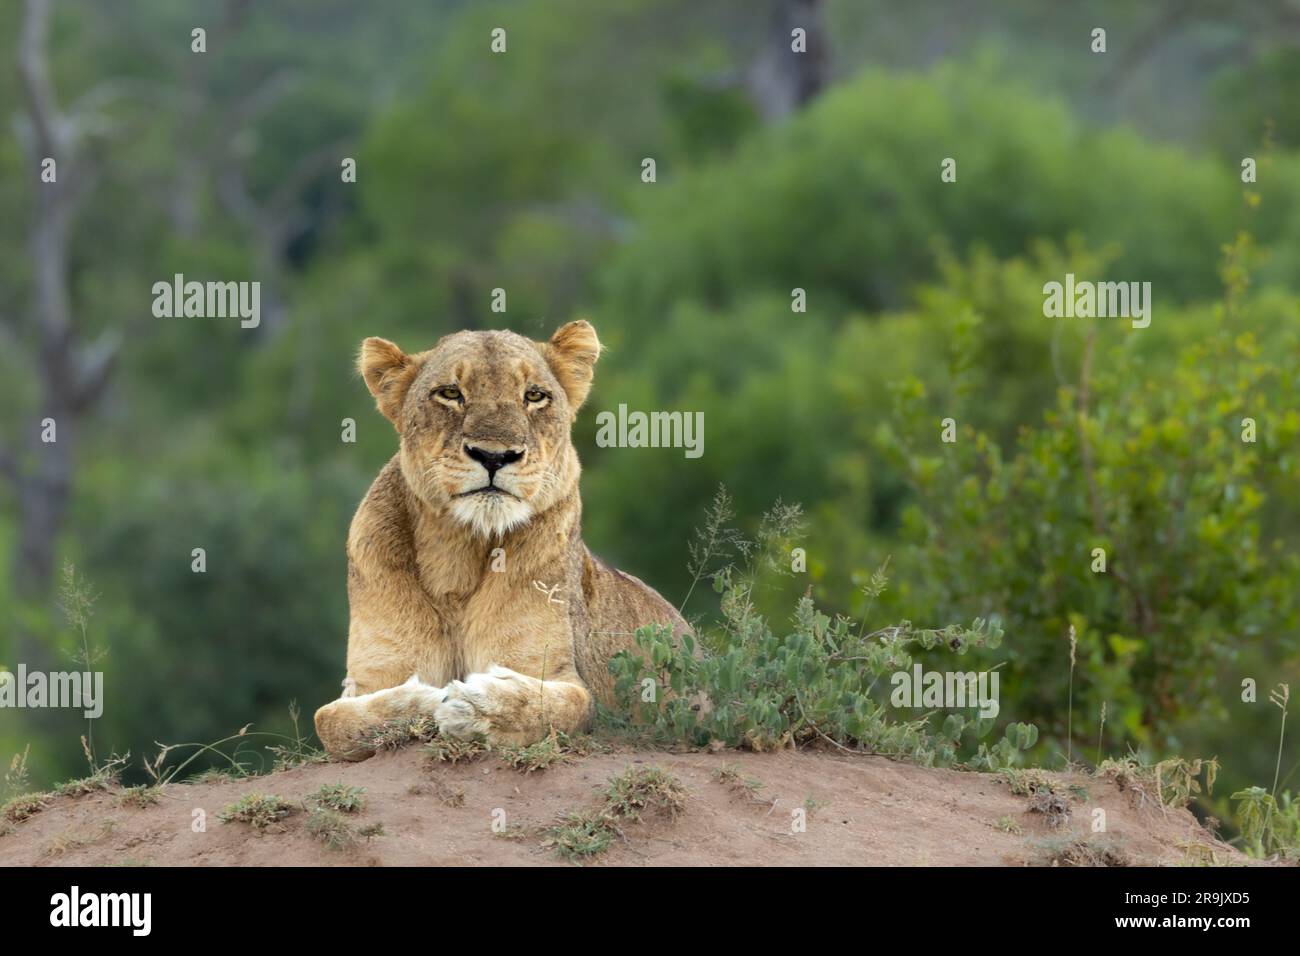 A Lioness, Panthera leo, lying down on the ground. Stock Photo